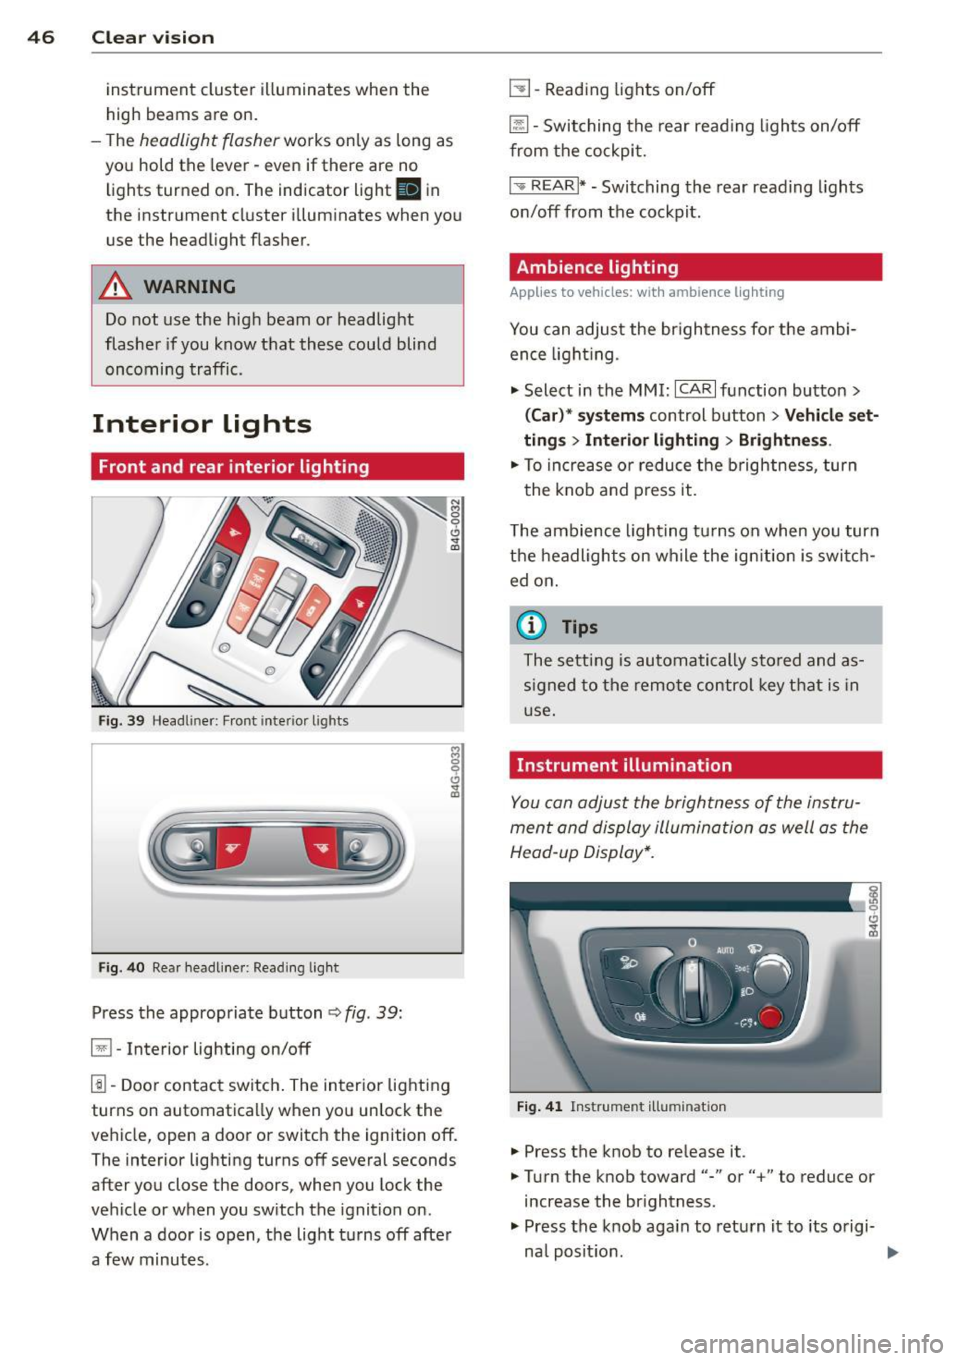 AUDI A6 2015 Service Manual 46  Clear vis ion 
instrument  cluste r illuminates  when  the 
high  beams are on. 
- T he 
headlight  flash er works  only  as long  as 
yo u hold  the lever - even if  there  are no 
l ights  turne